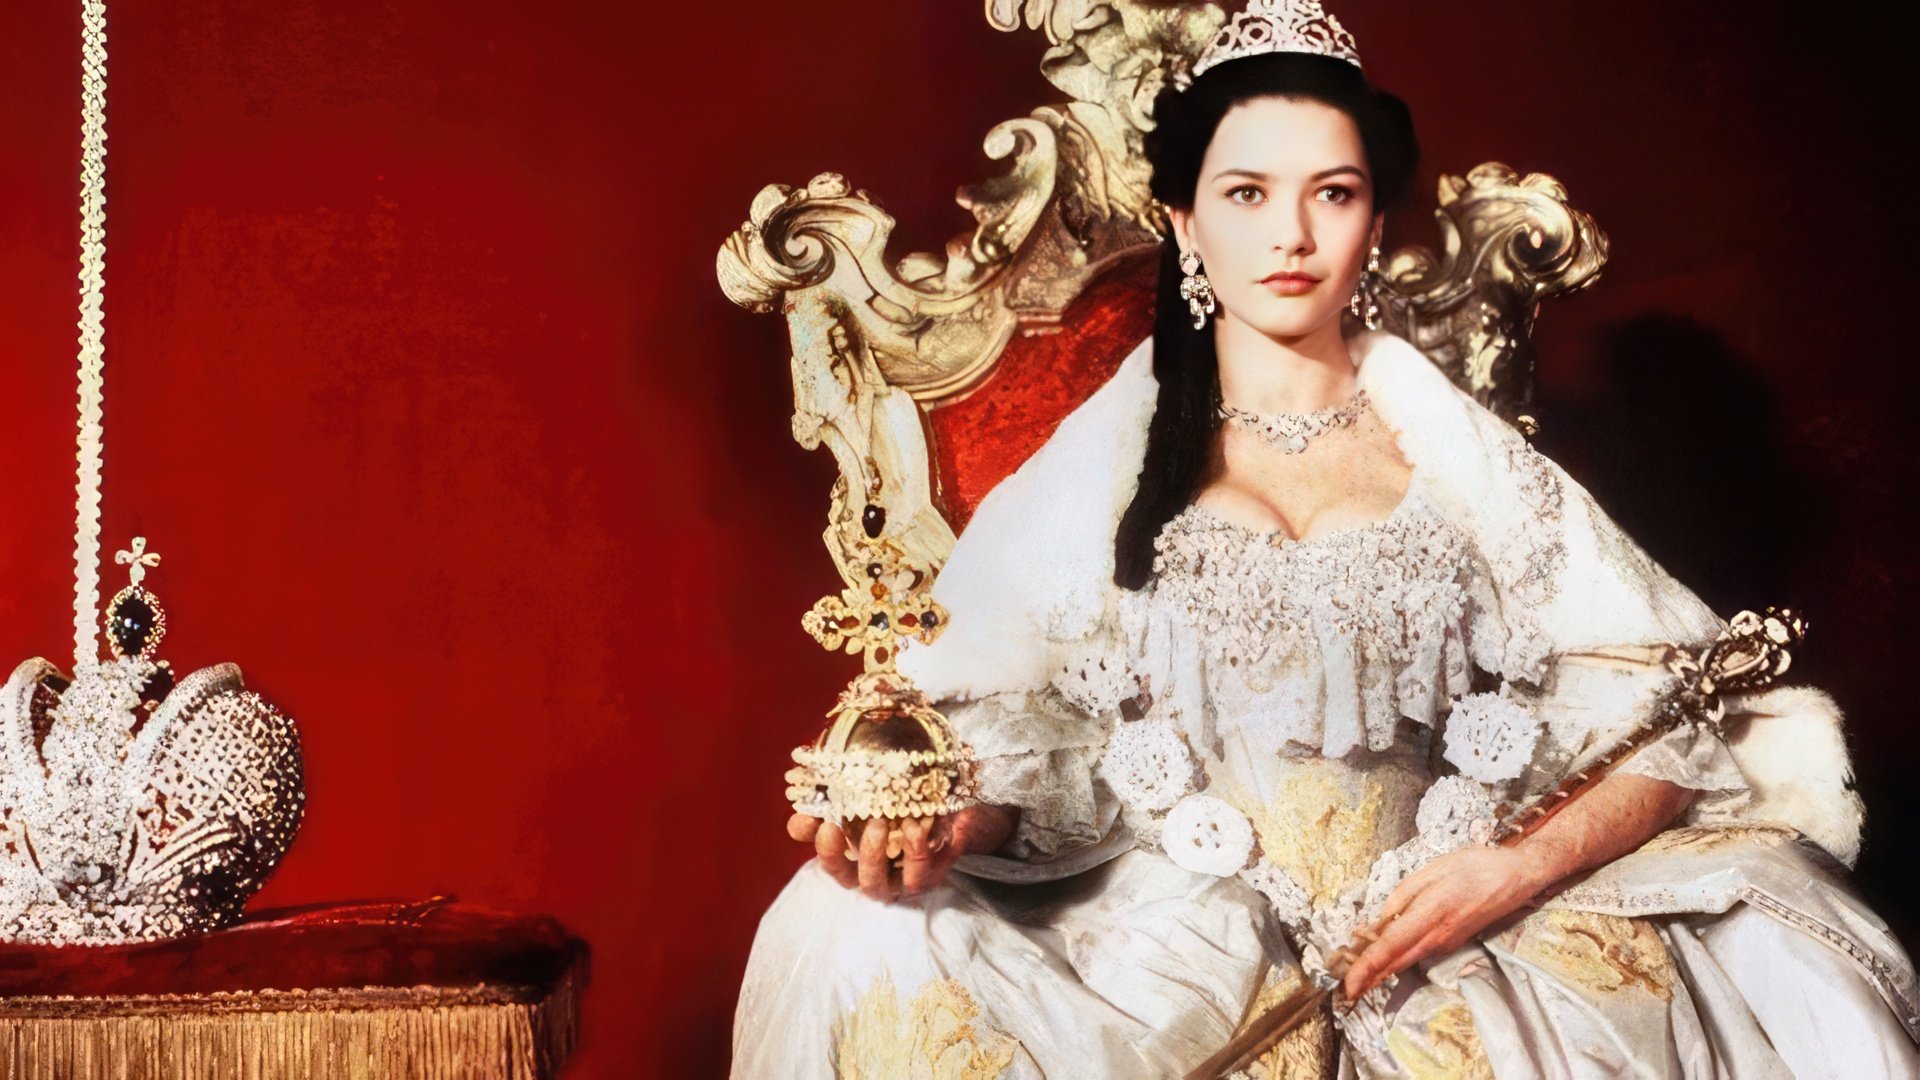 Catherine started conquering Hollywood by accepting the role of Catherine the Great